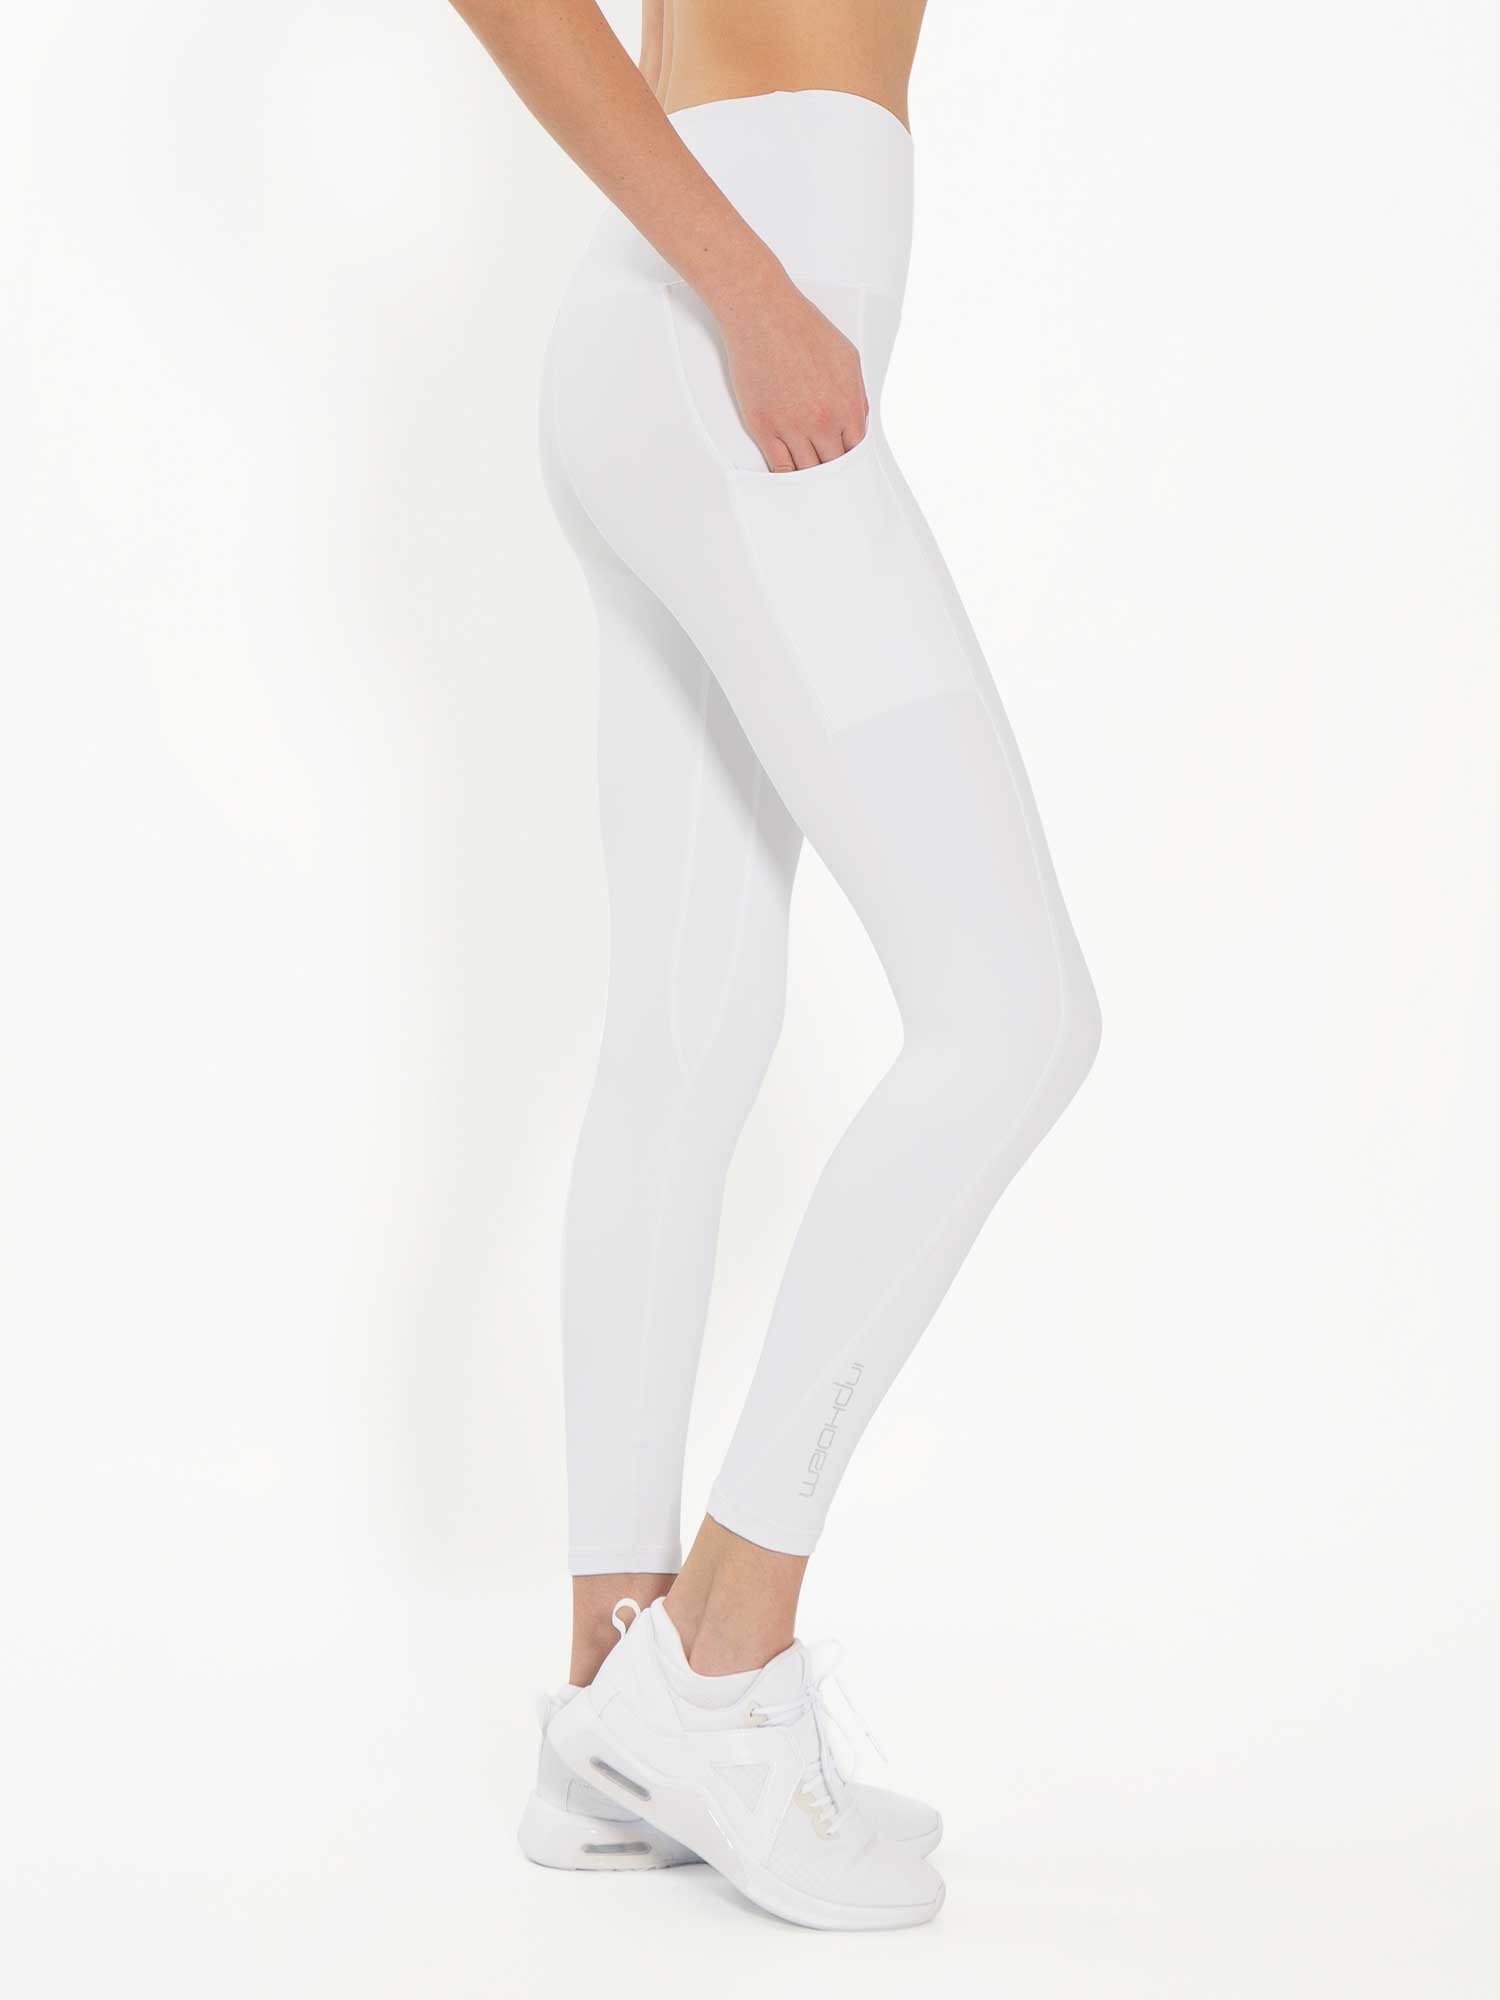 Side view of model wearing the Ashel 7/8 leggings in white by inPhorm NYC with one hand in her pocket